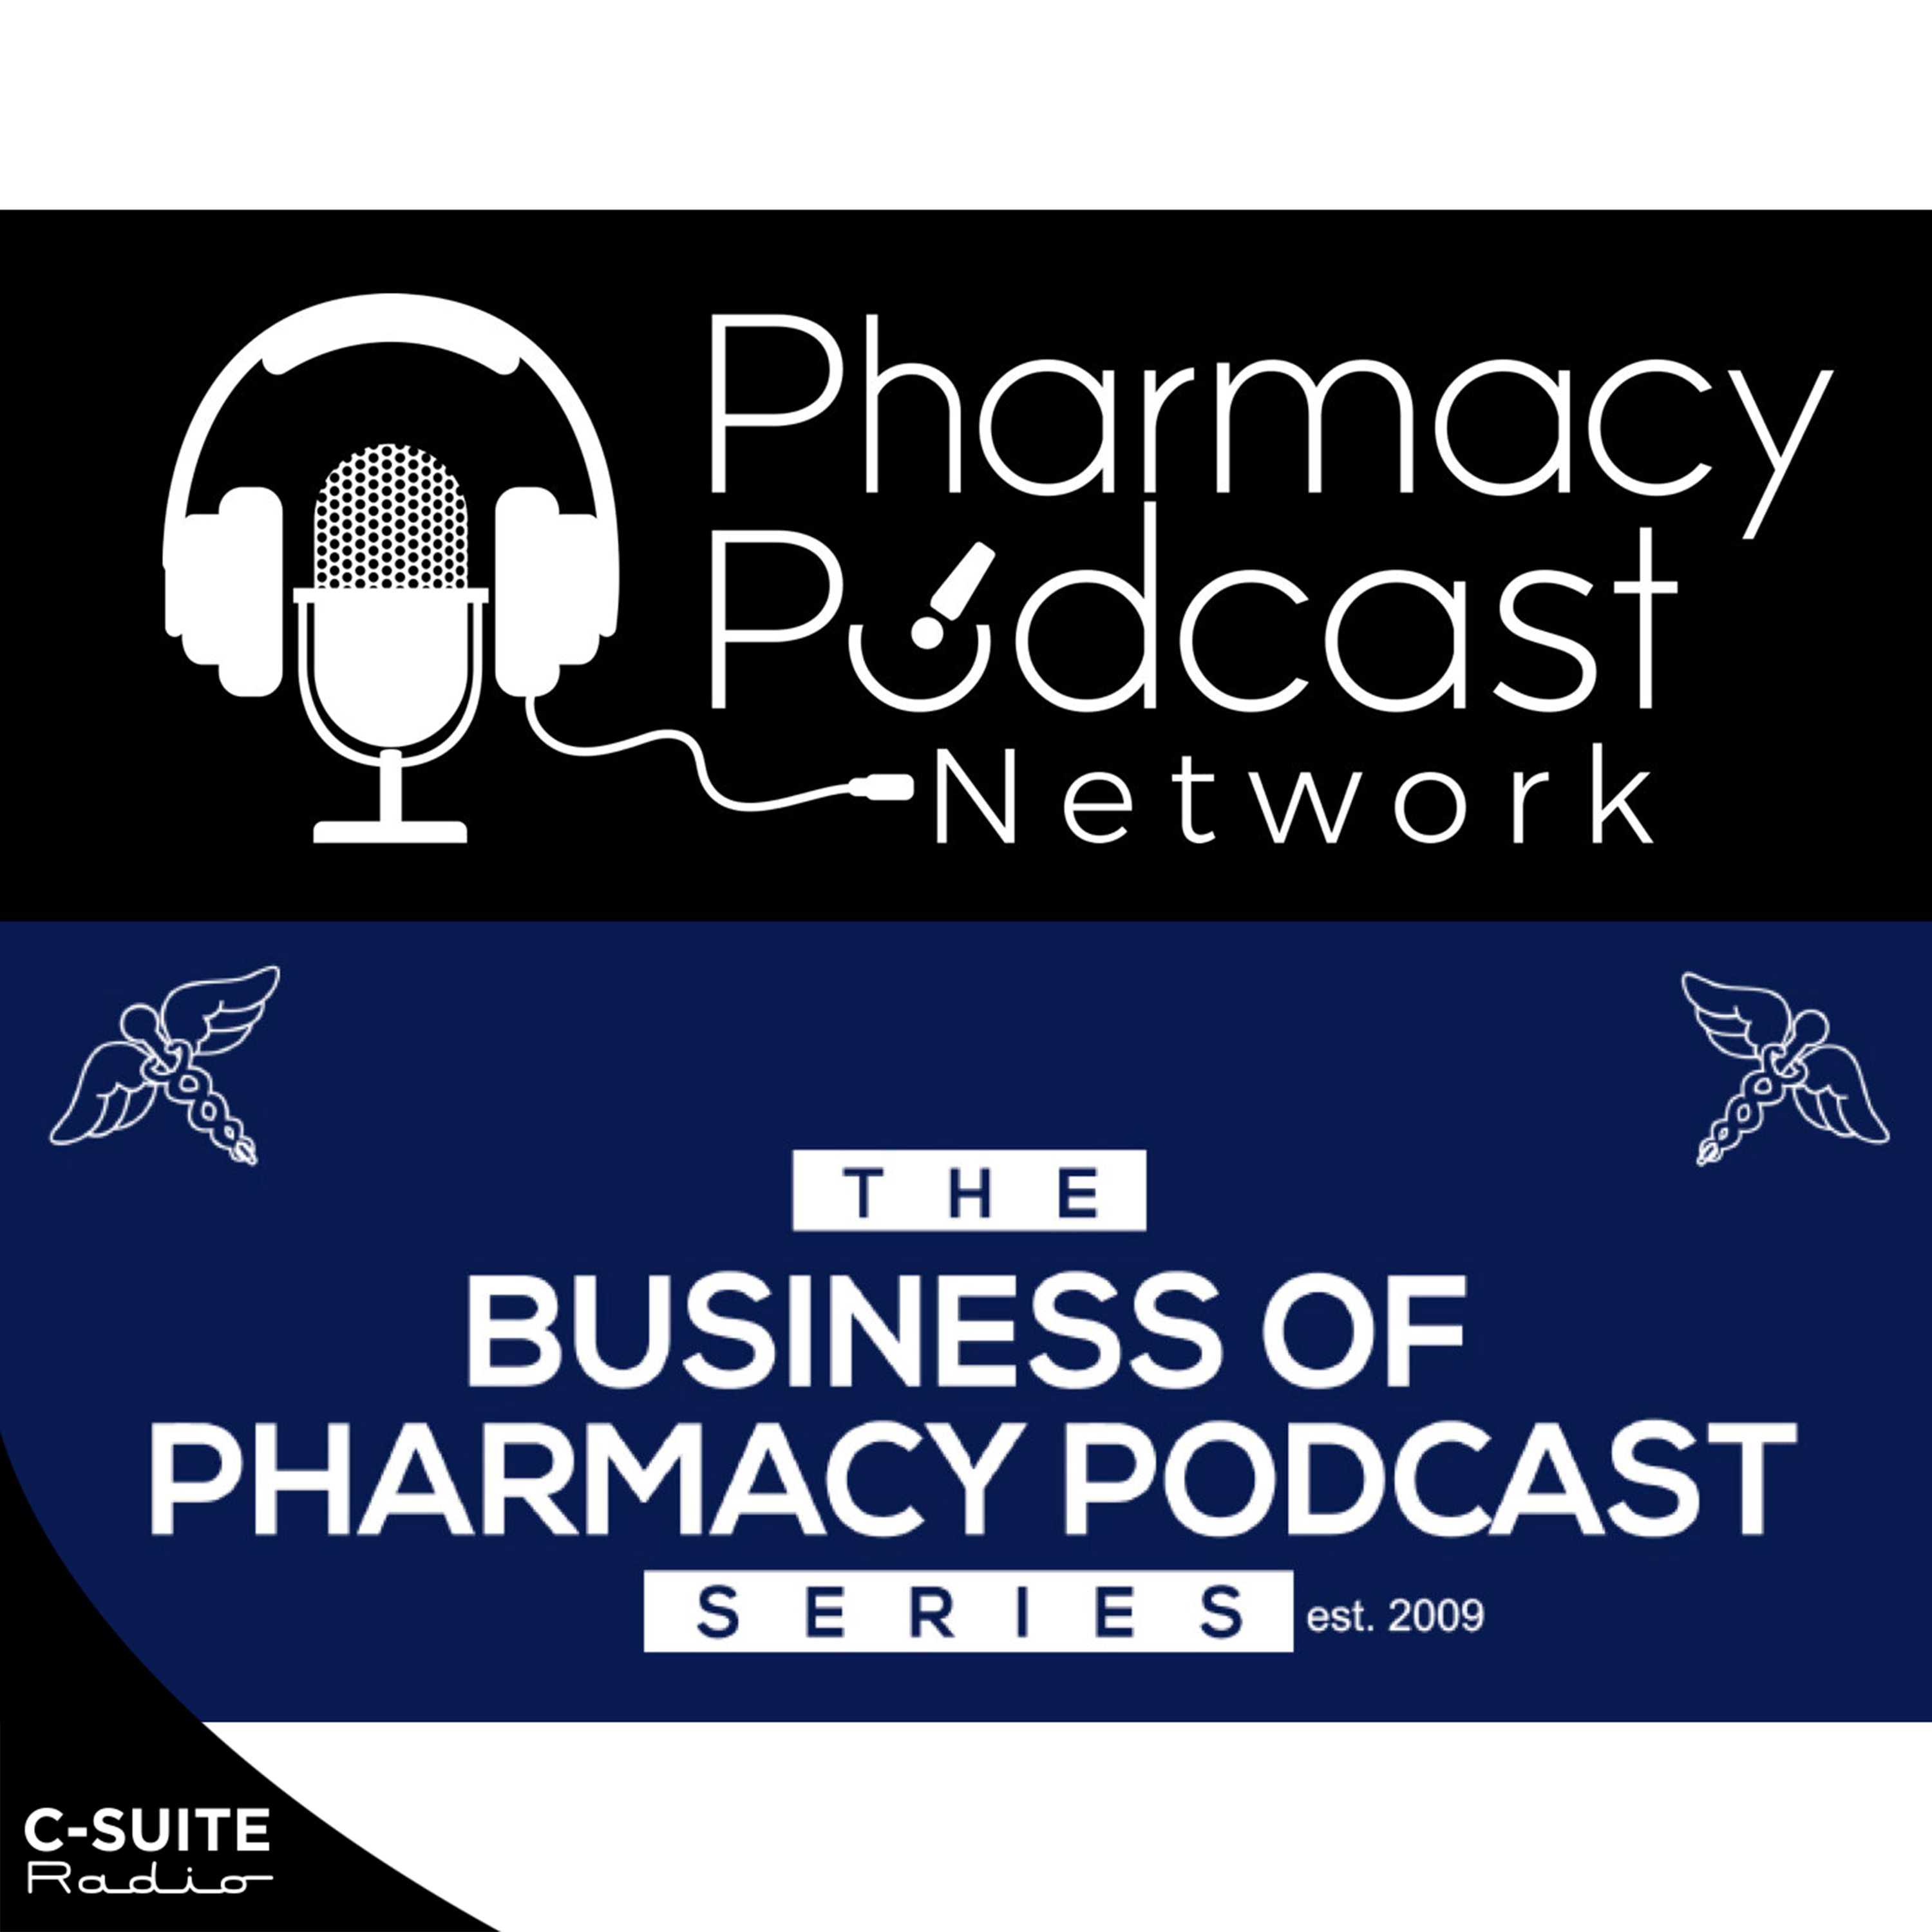 the Business of Pharmacy Podcast Series